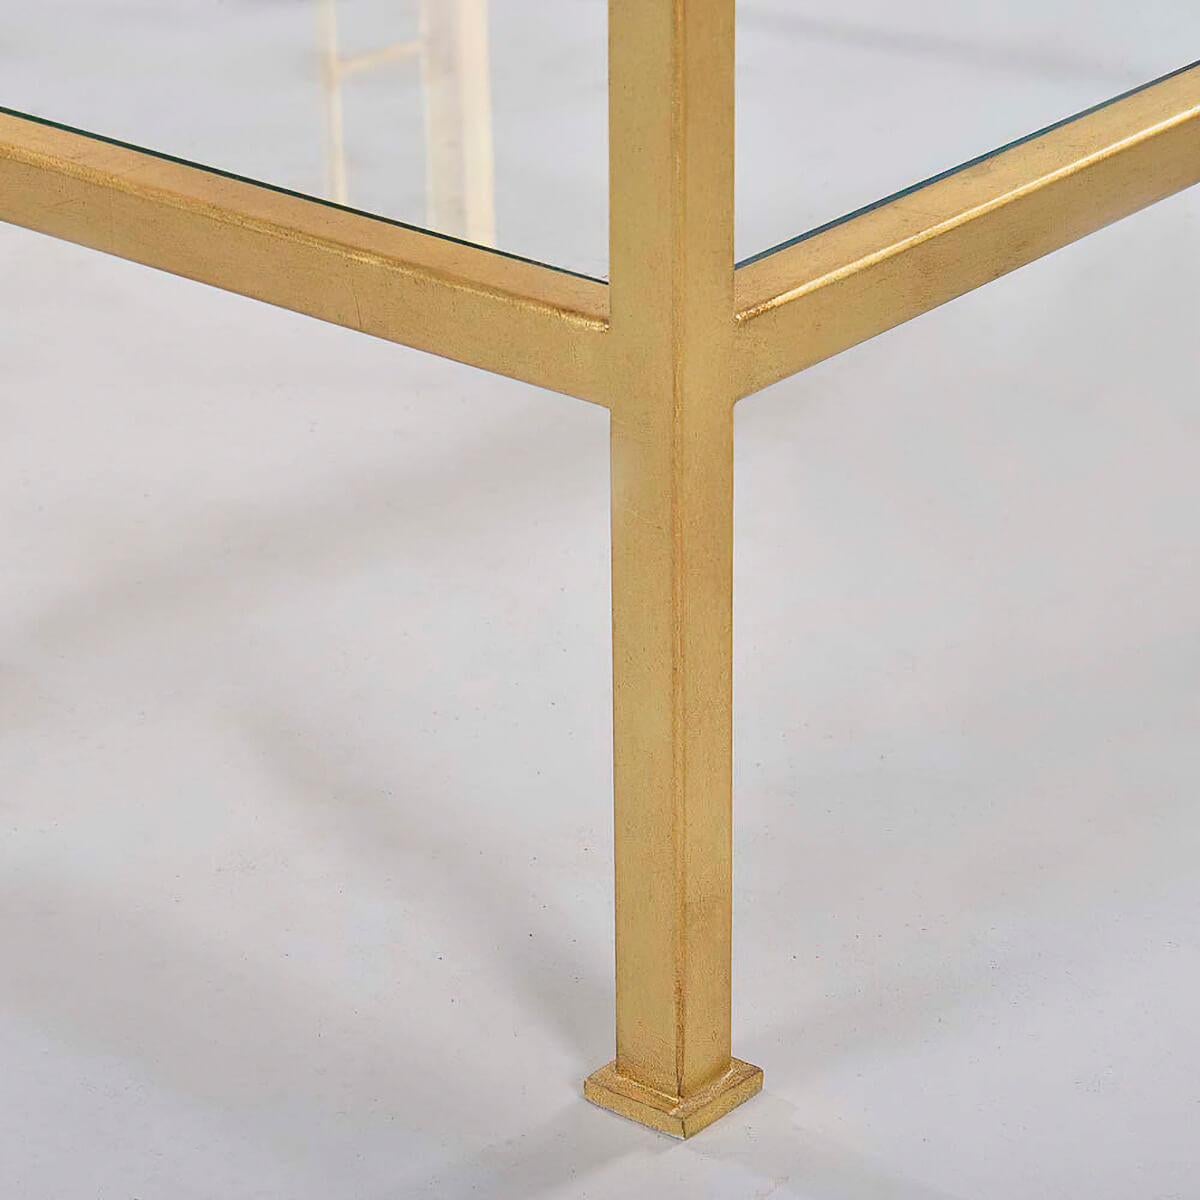 Midcentury style narrow rectangle console table with clear 6mm tempered glass top and shelf, straight legs, and portrait frame detail on the table sides, has a “gold leaf” finish on a steel frame.

Dimensions: 64